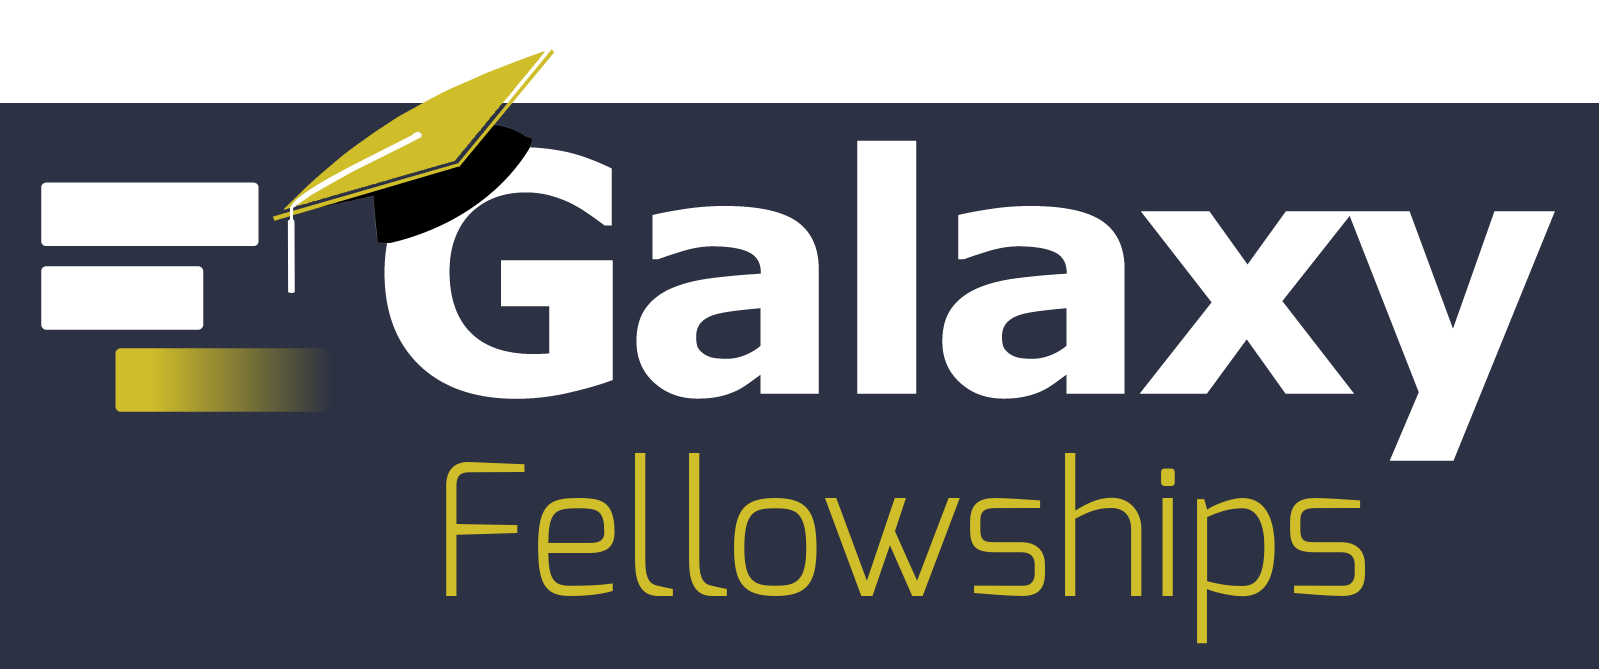 Fellowship applications due July 10